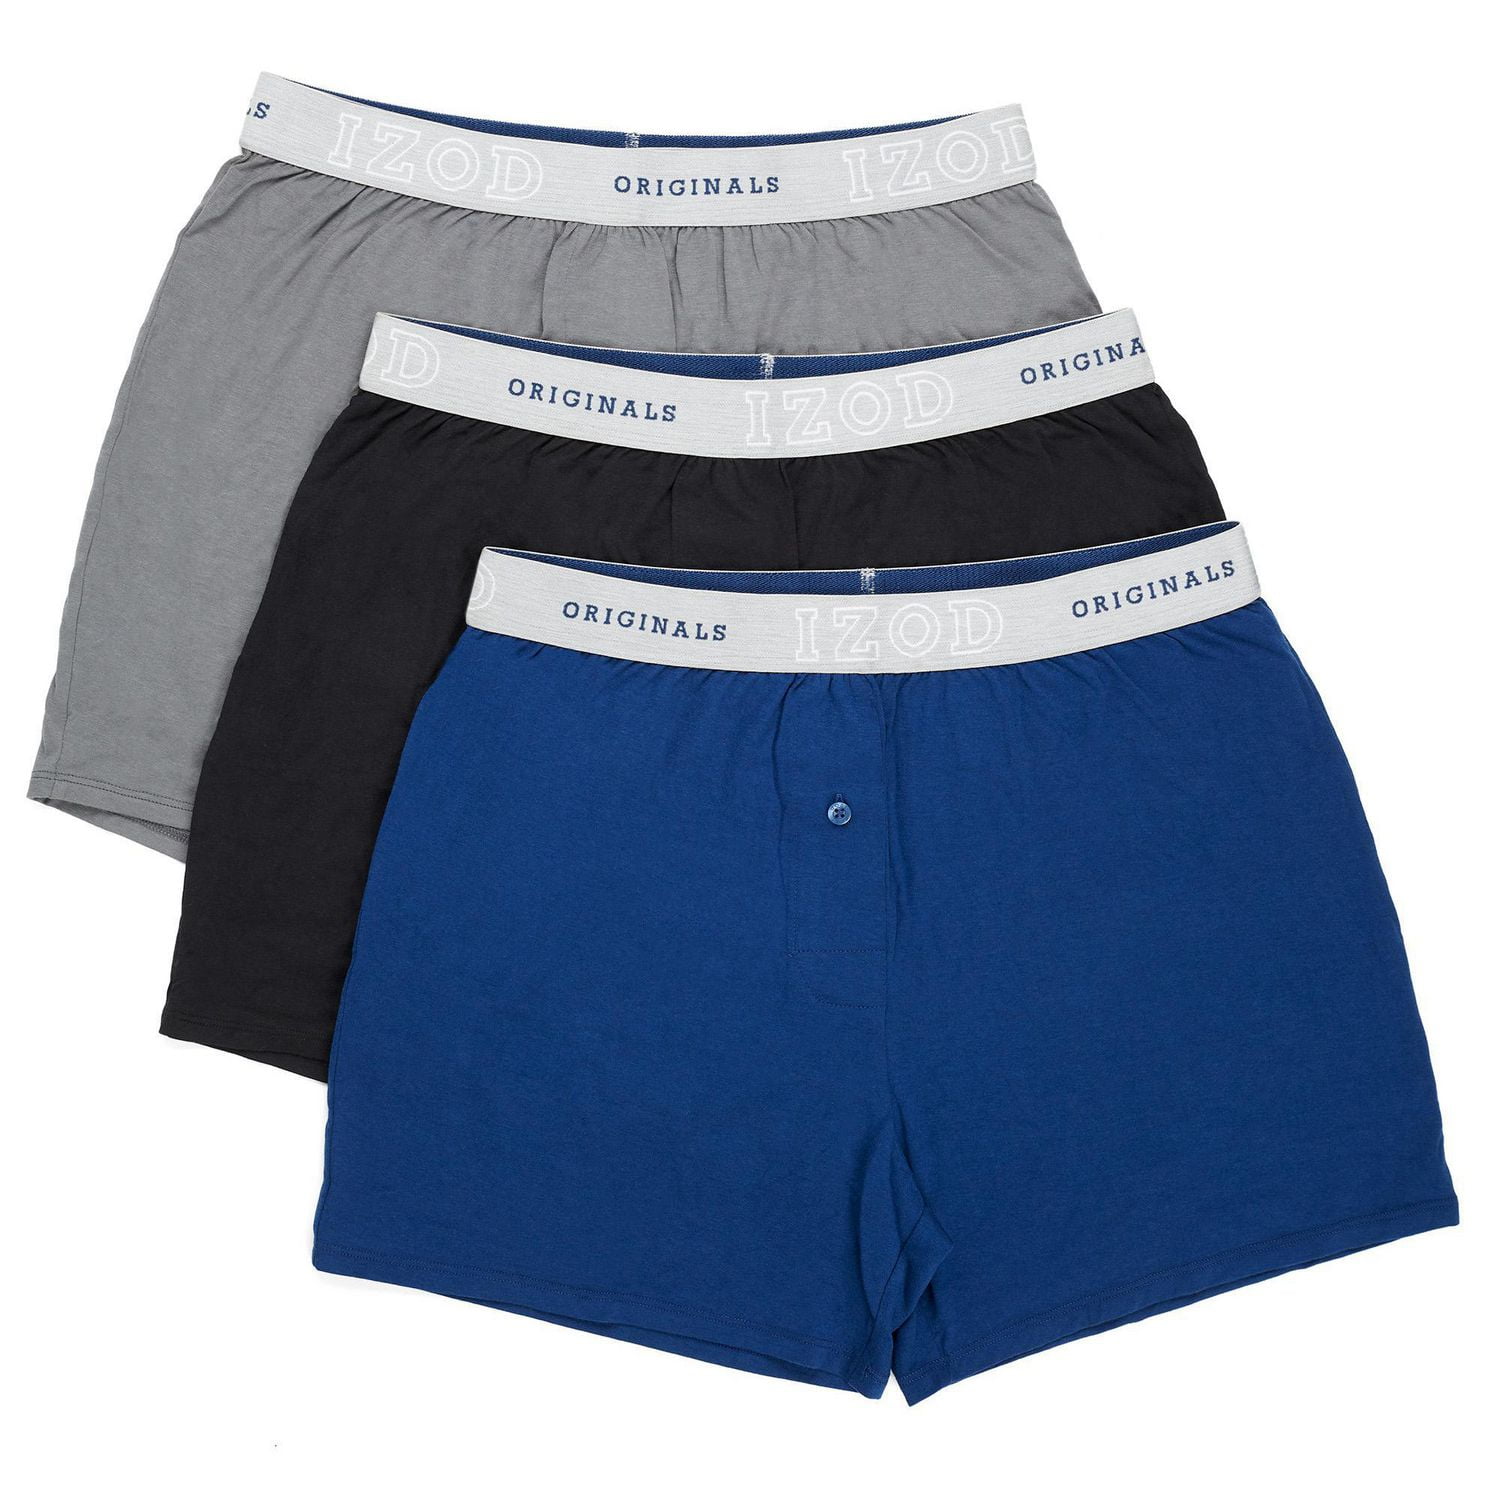 IZOD Mens Classic Knit Boxers - 4 pack